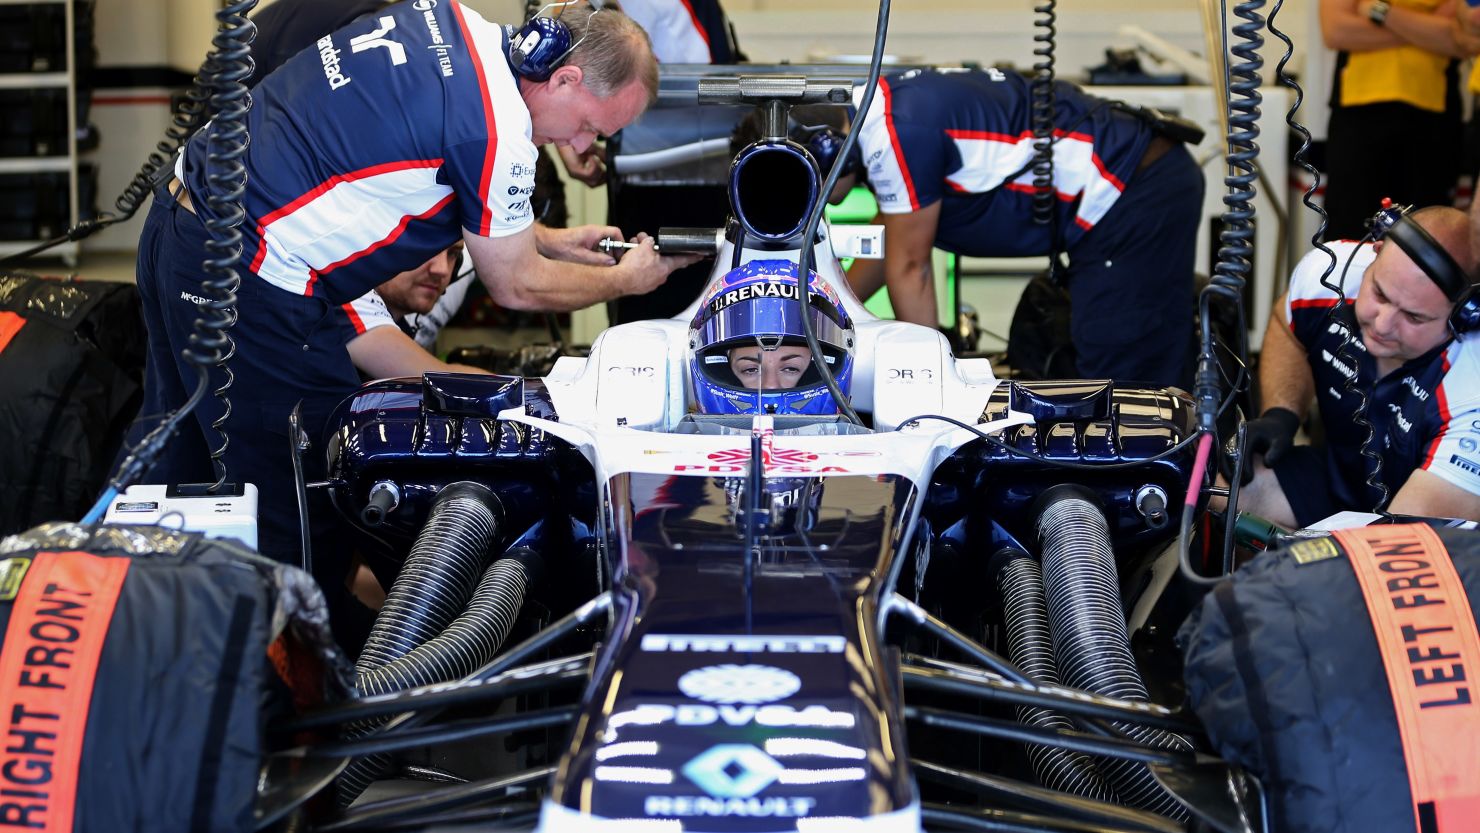 Susie Wolff moved another step closer to her dream of driving in Formula One after a successful  day's testing for Williams